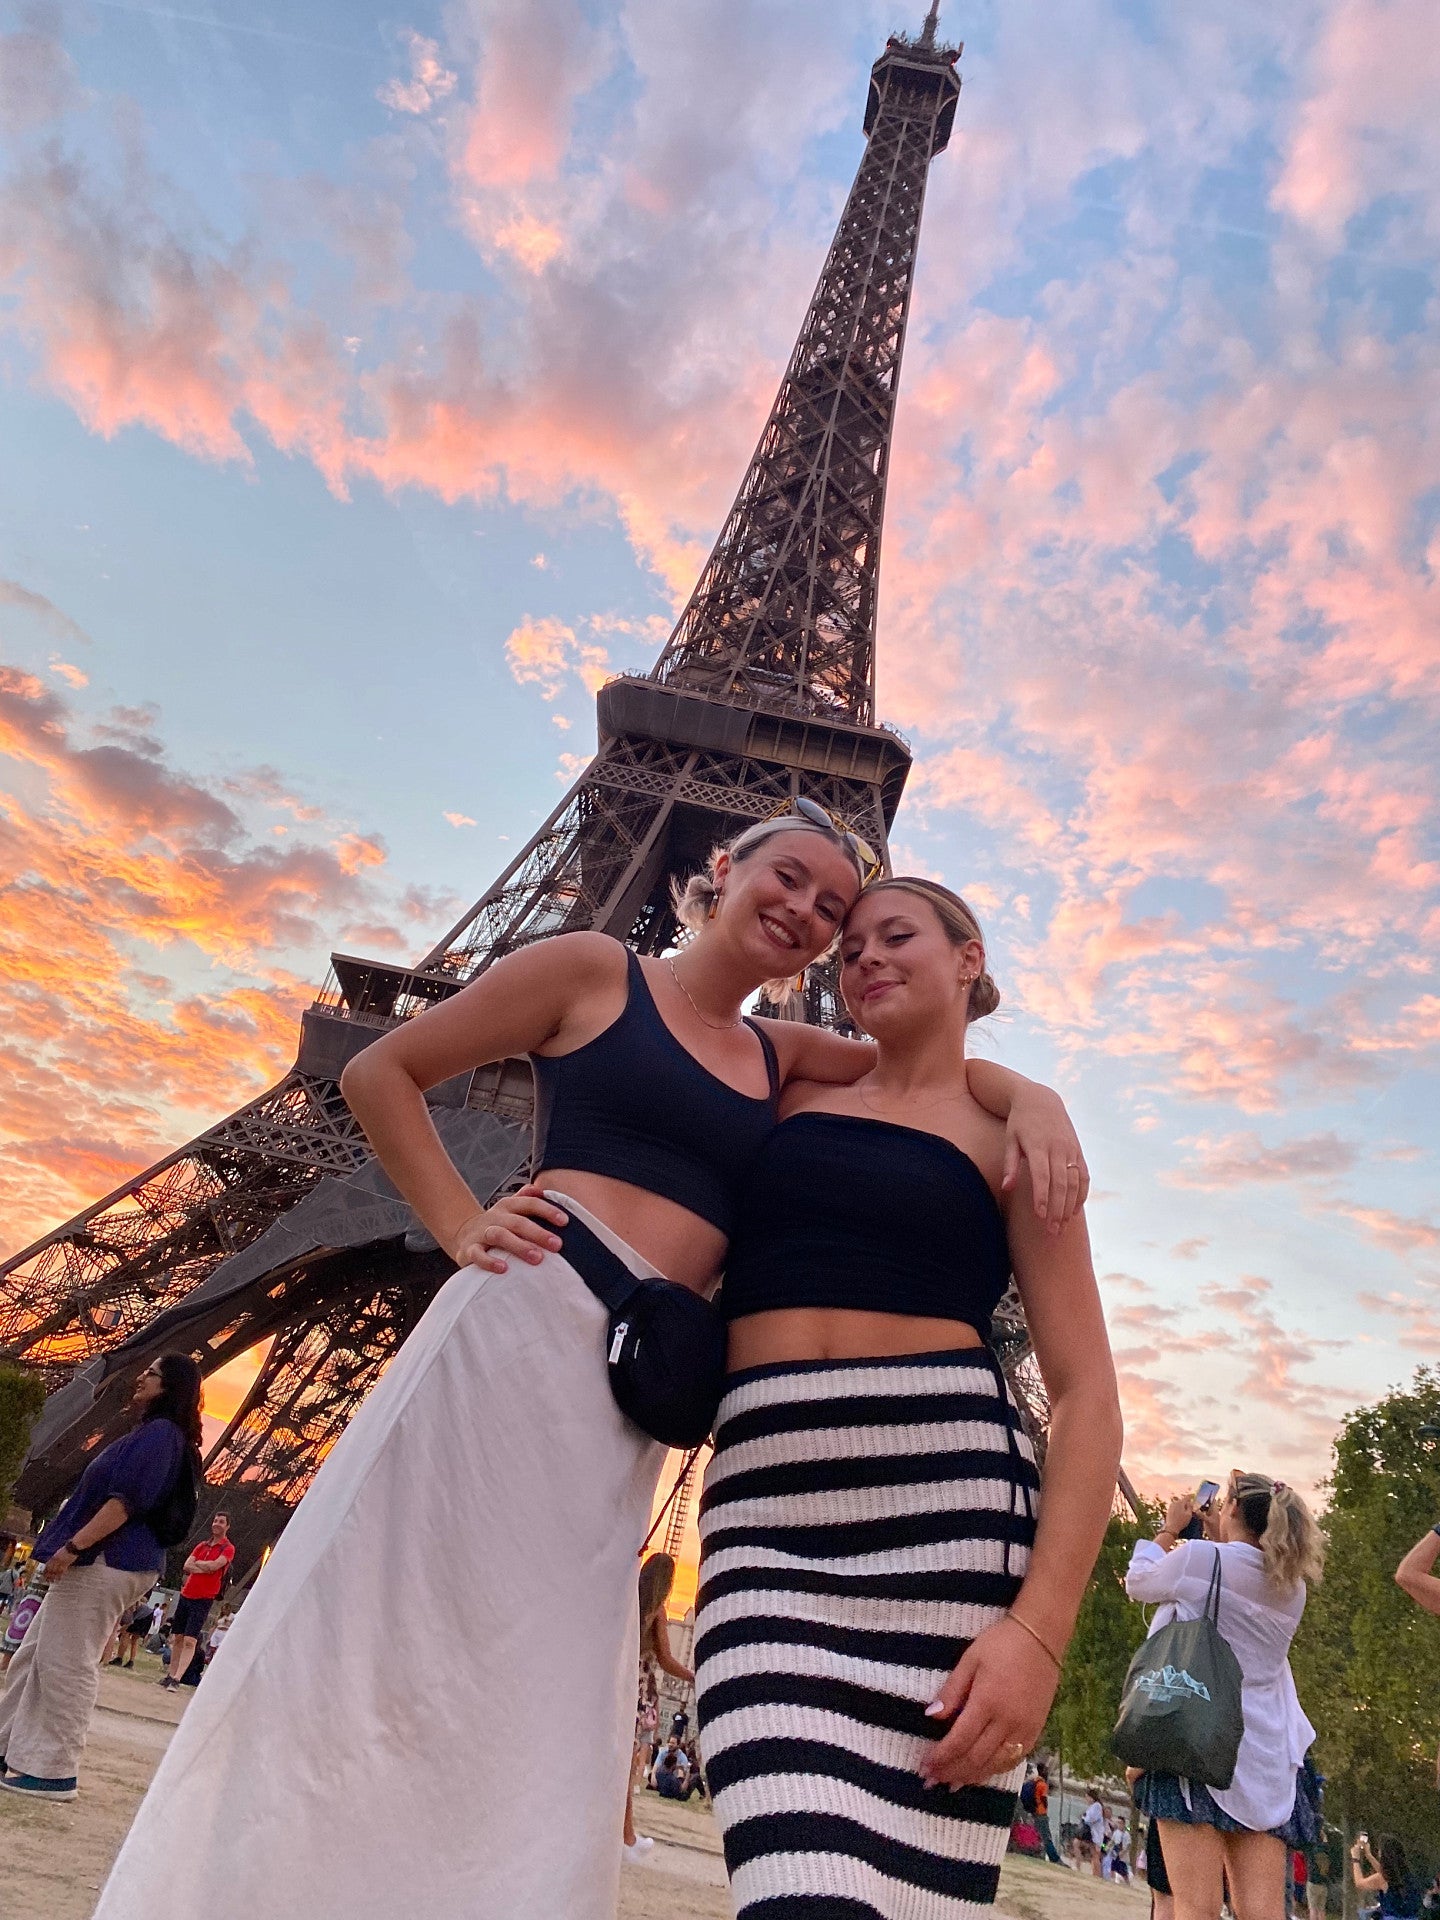 Honour and her friends in front of the Eiffel Tower. The sun is setting, so the clouds in the sky are pink and orange.